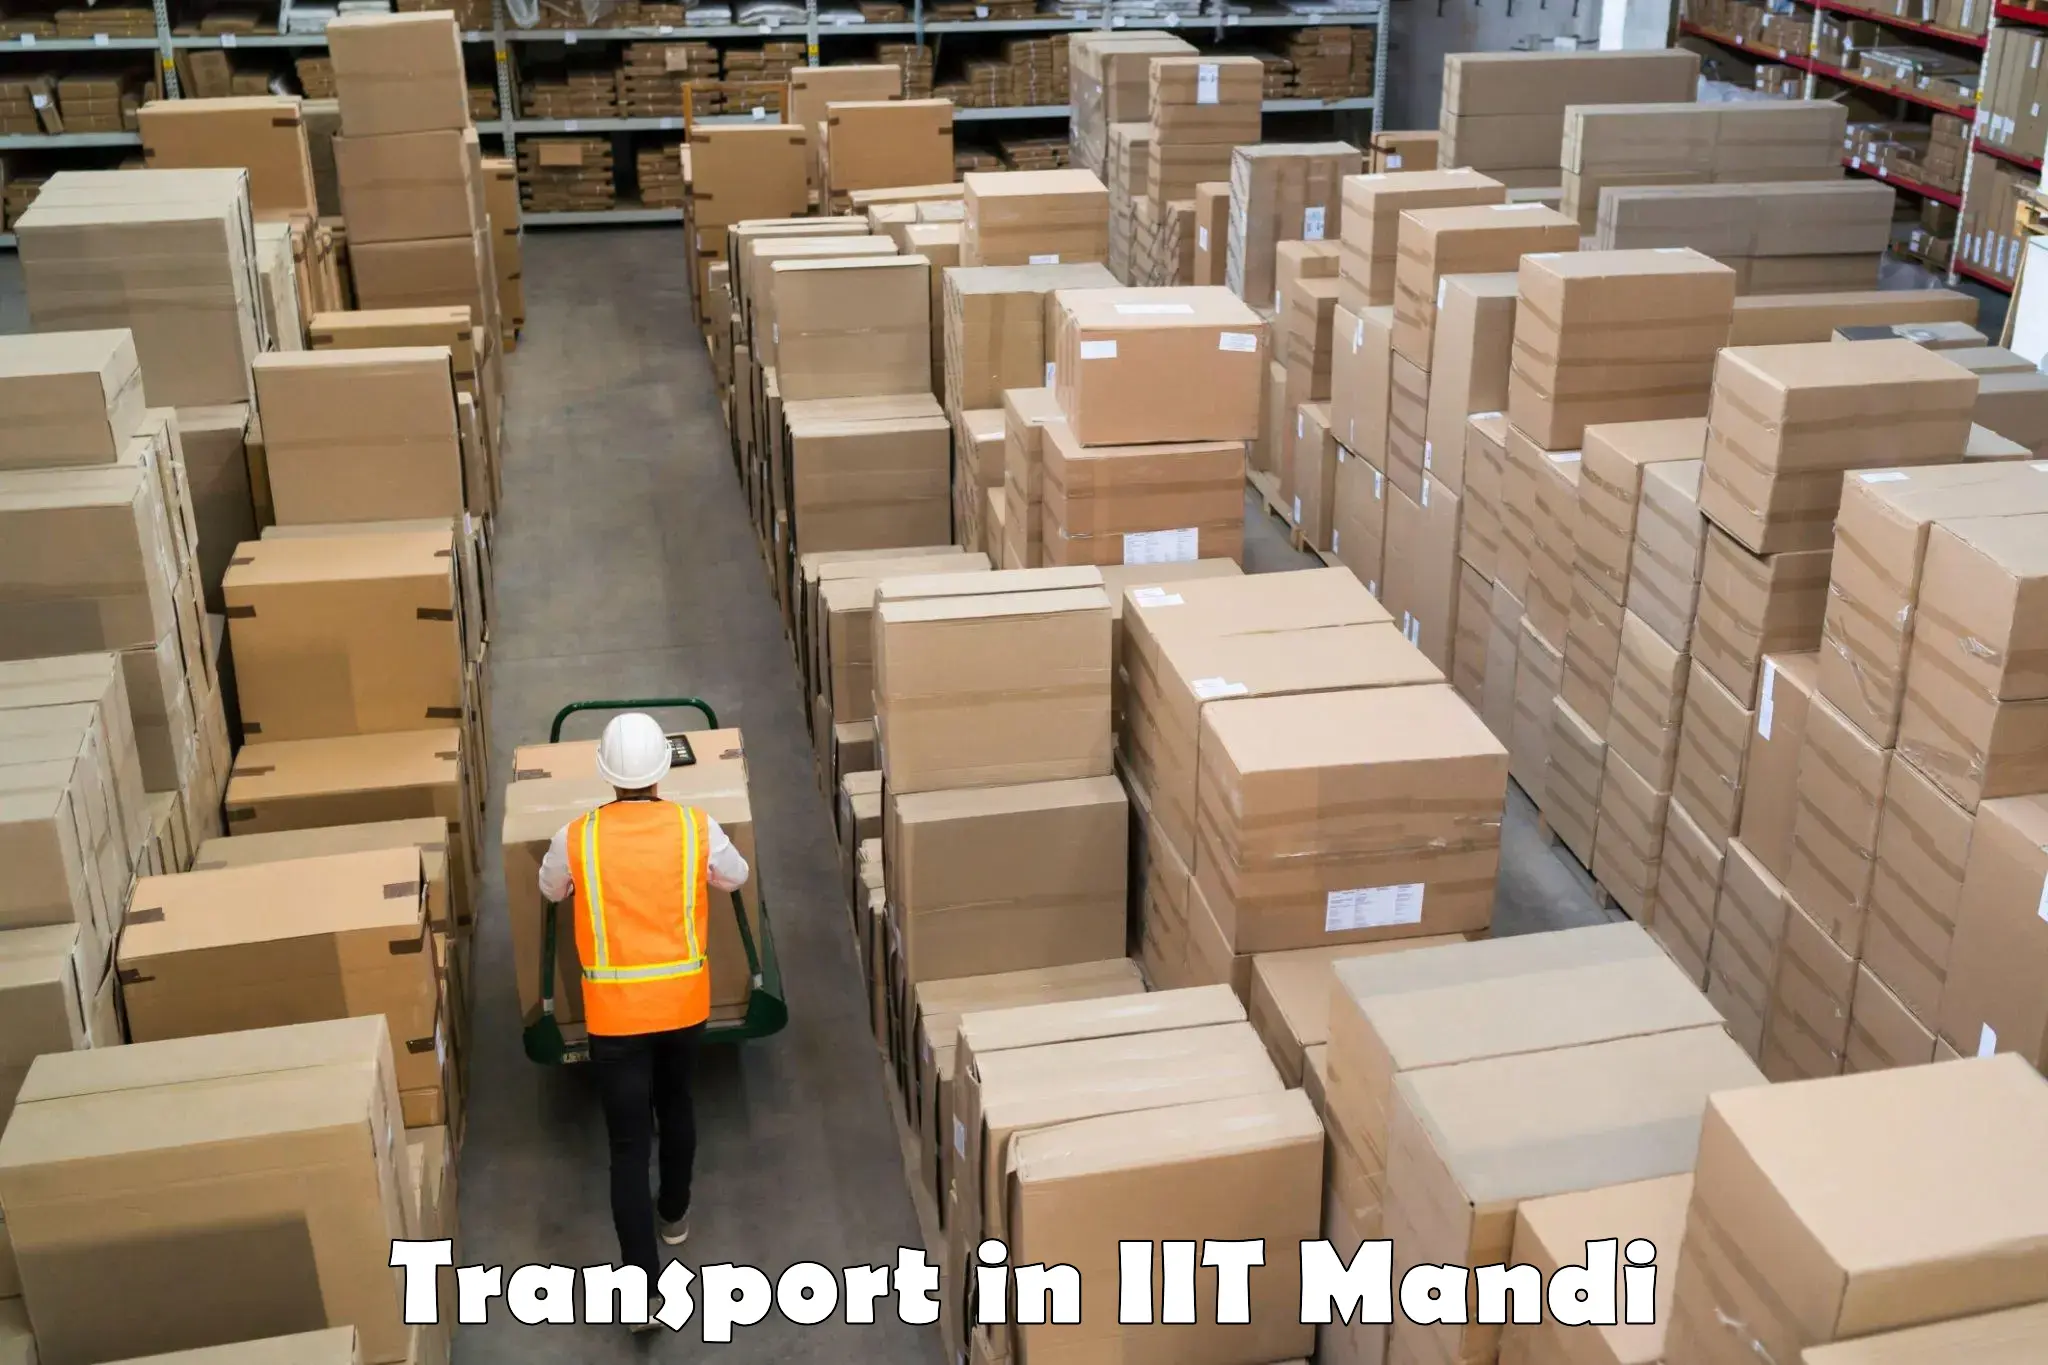 Luggage transport services in IIT Mandi